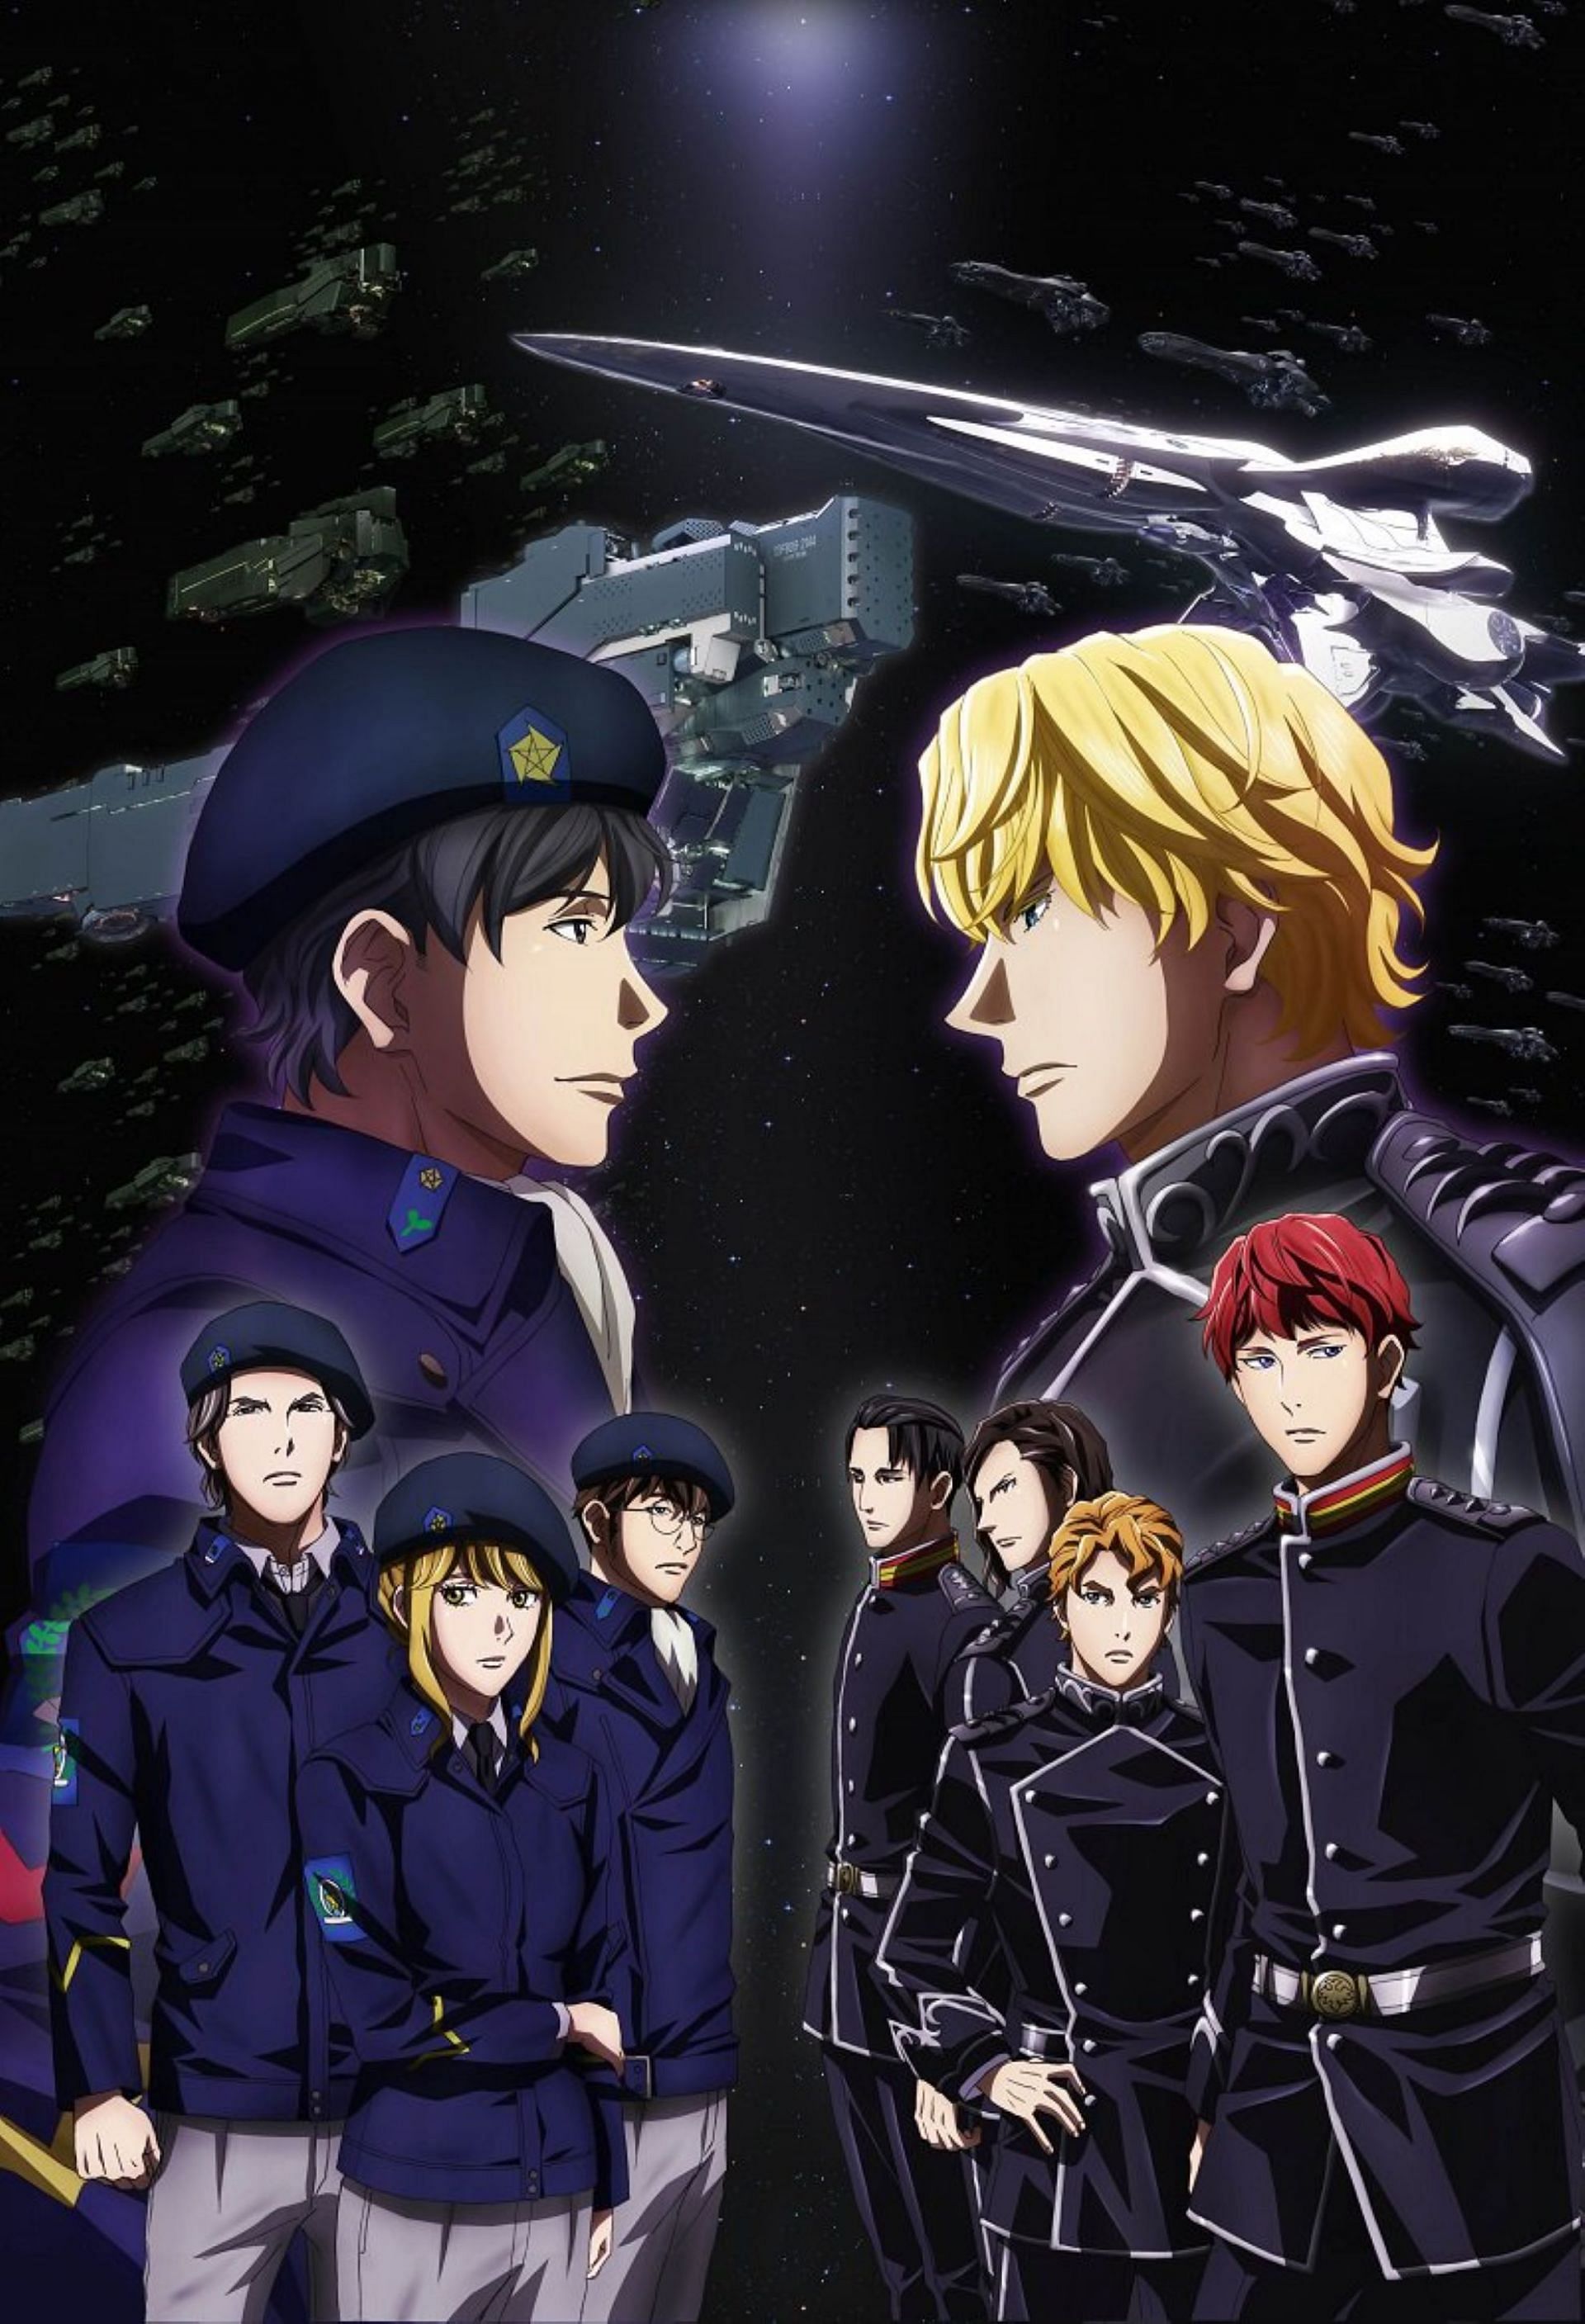 Legend of the Galactic Heroes poster (image via Production I.G.)